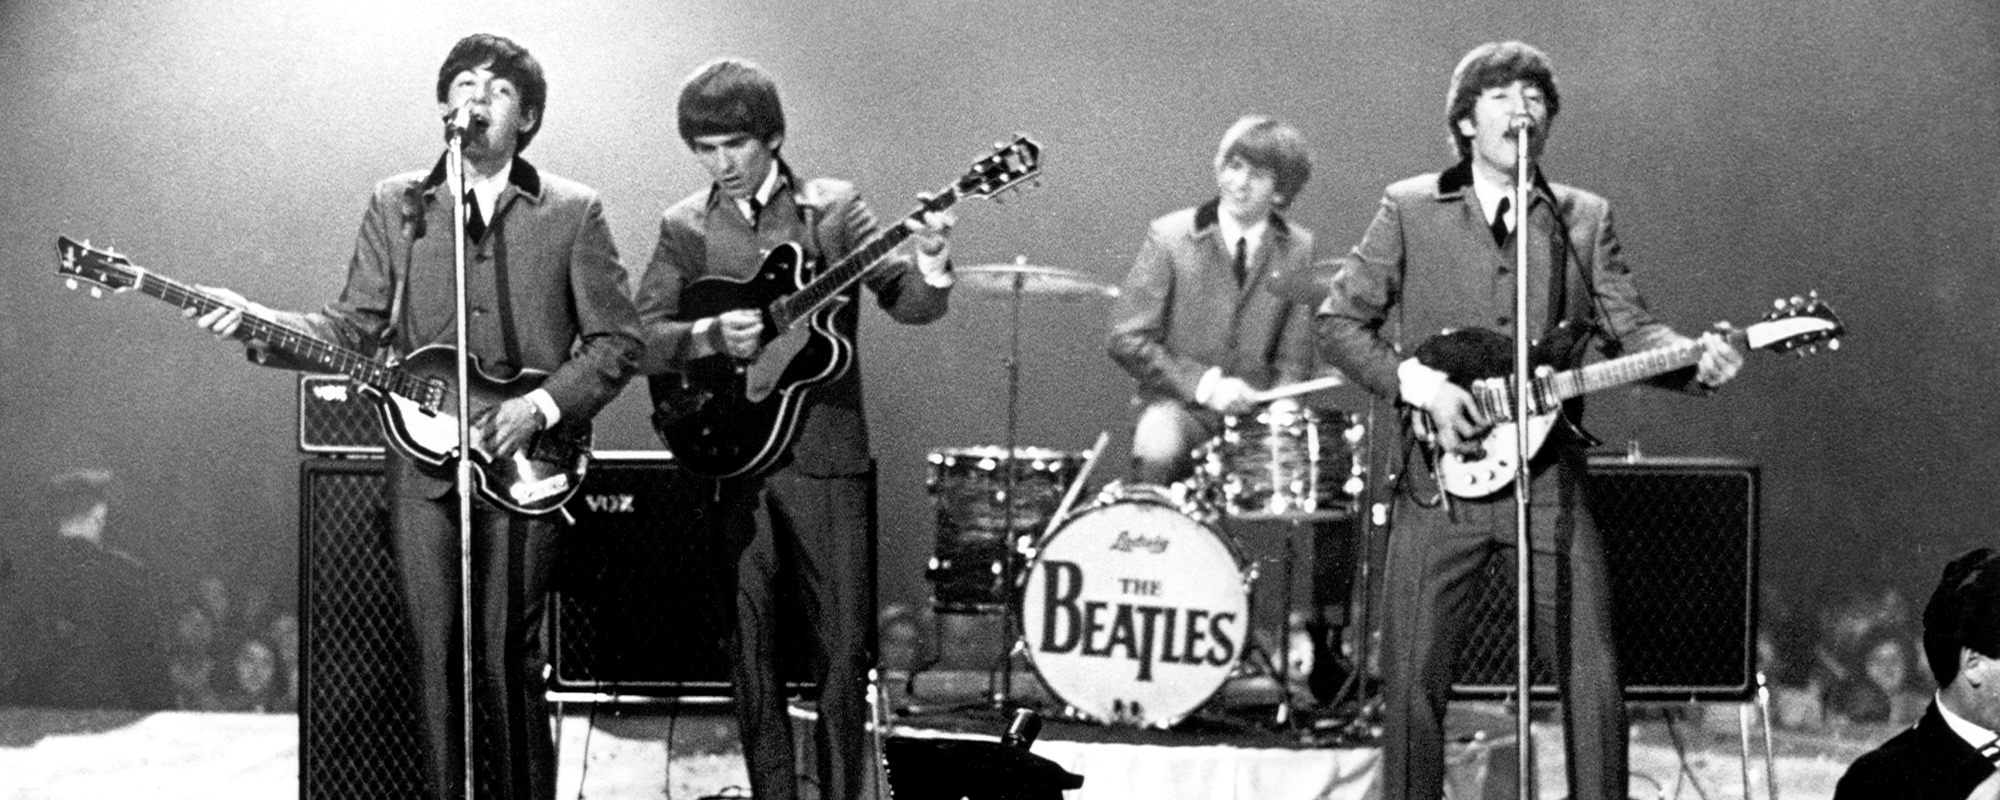 5 Hidden Parts of Beatles Songs You’ve Probably Missed